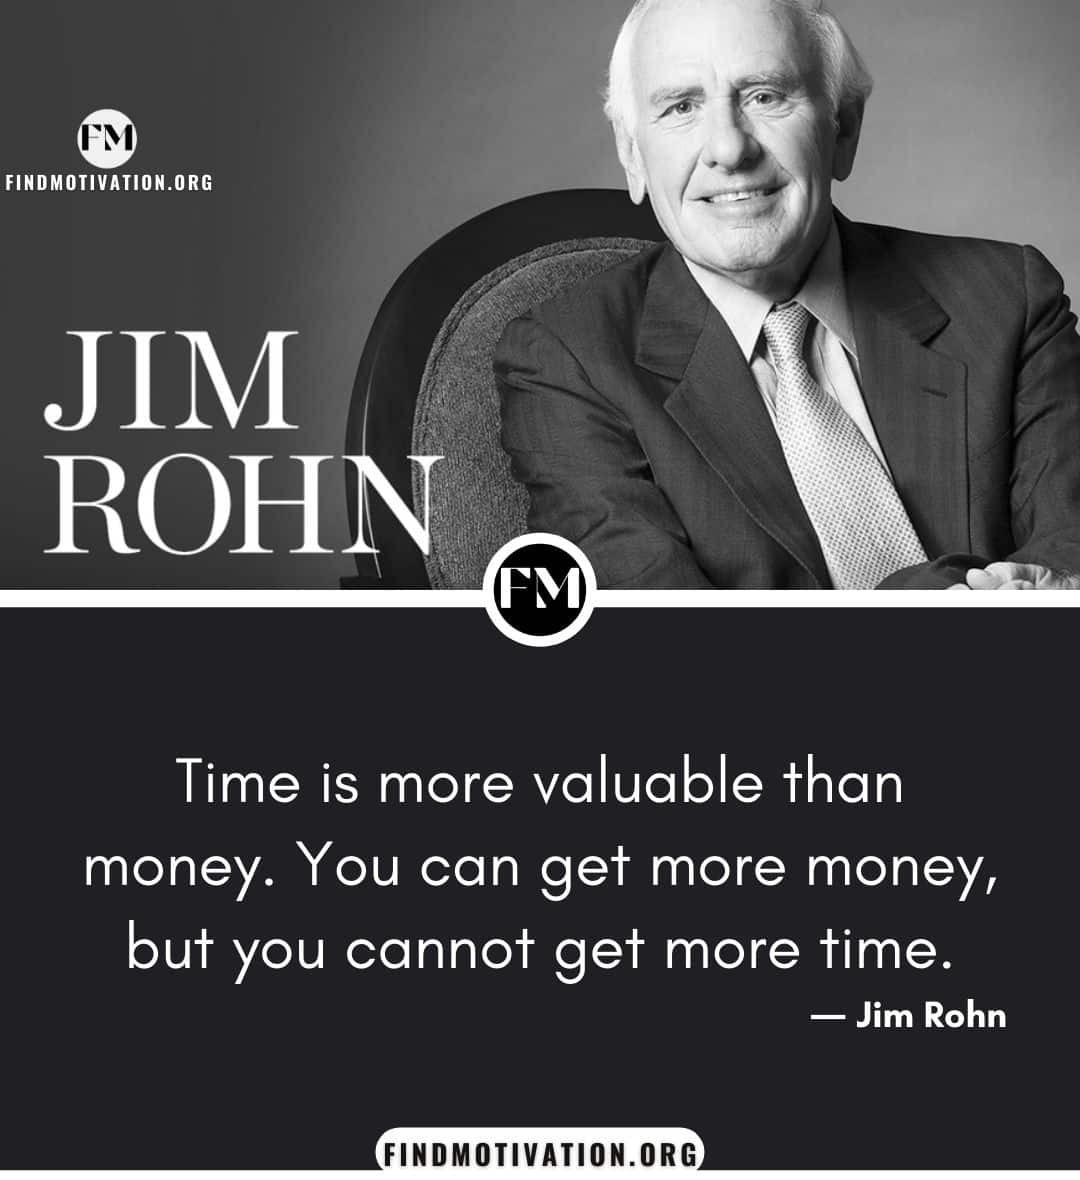 Inspiring Jim Rohn's life quotes will help you to change and build your life by practicing some useful tips